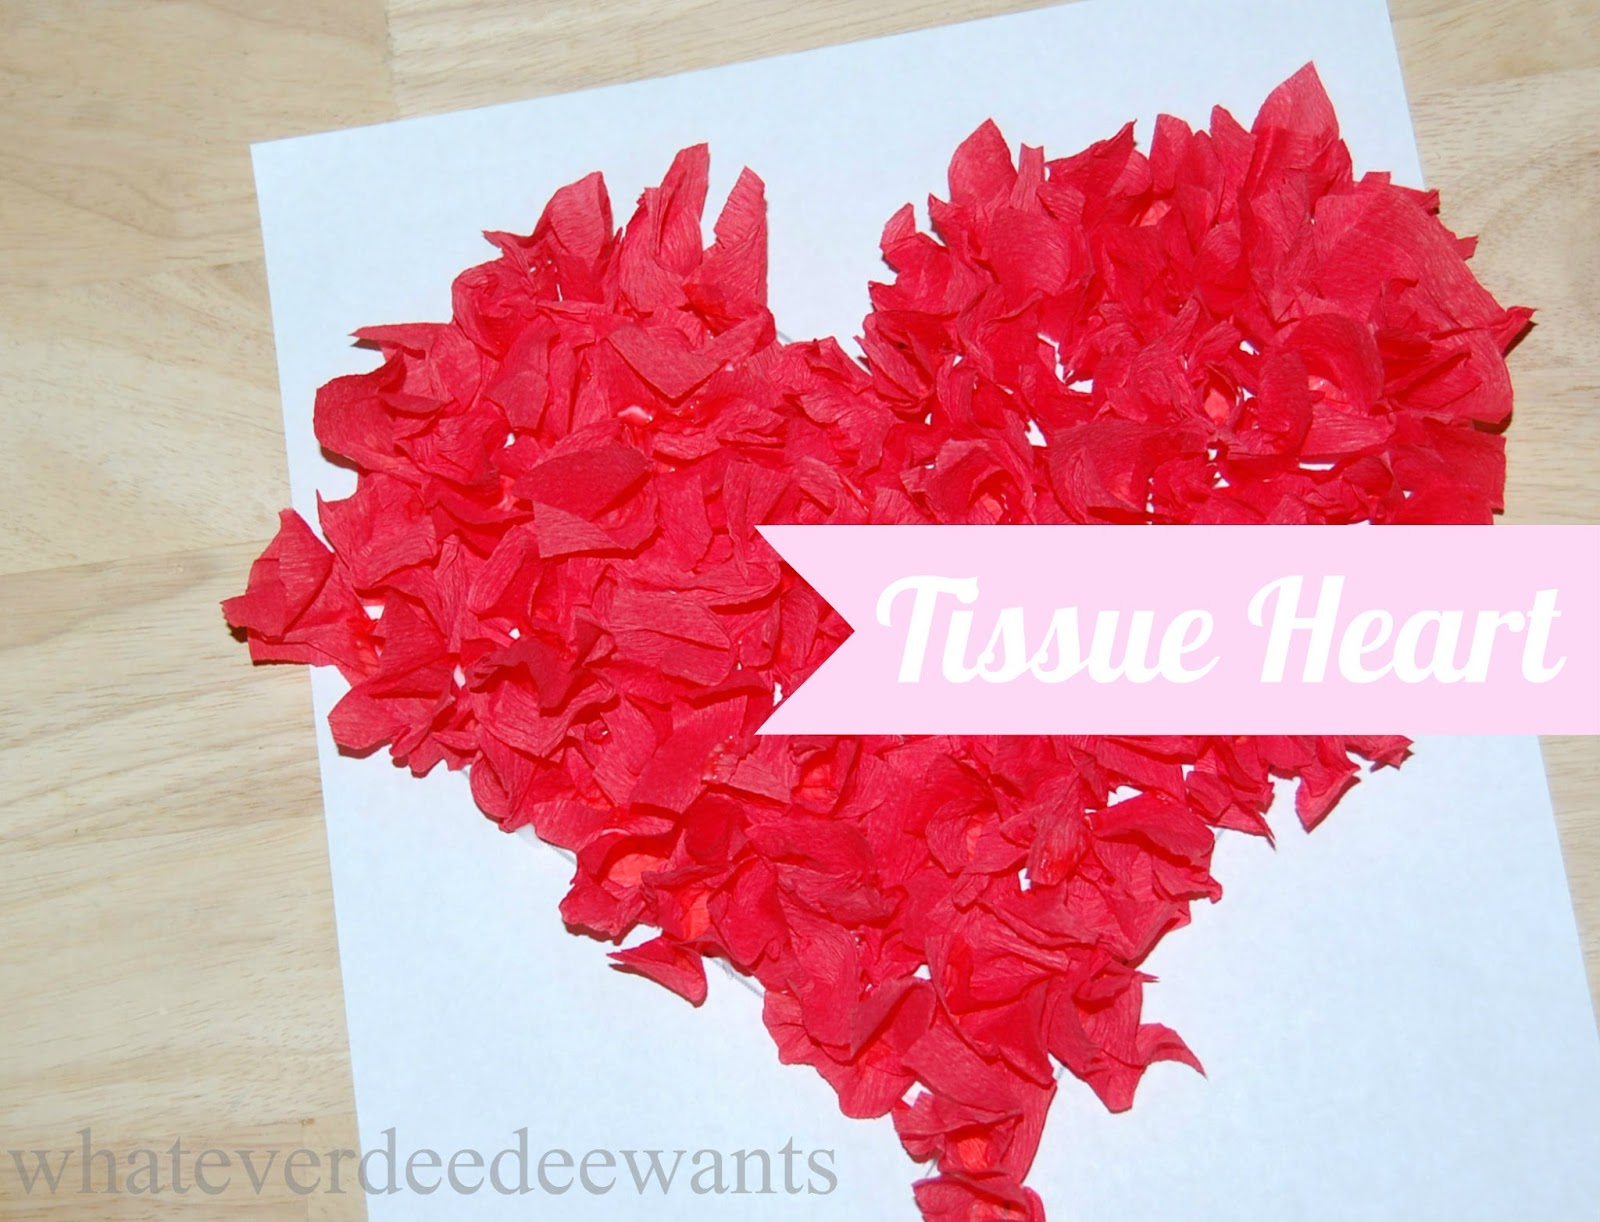 Whatever Dee-Dee wants, she's gonna get it: Kids Valentines Craft: Tissue  Heart